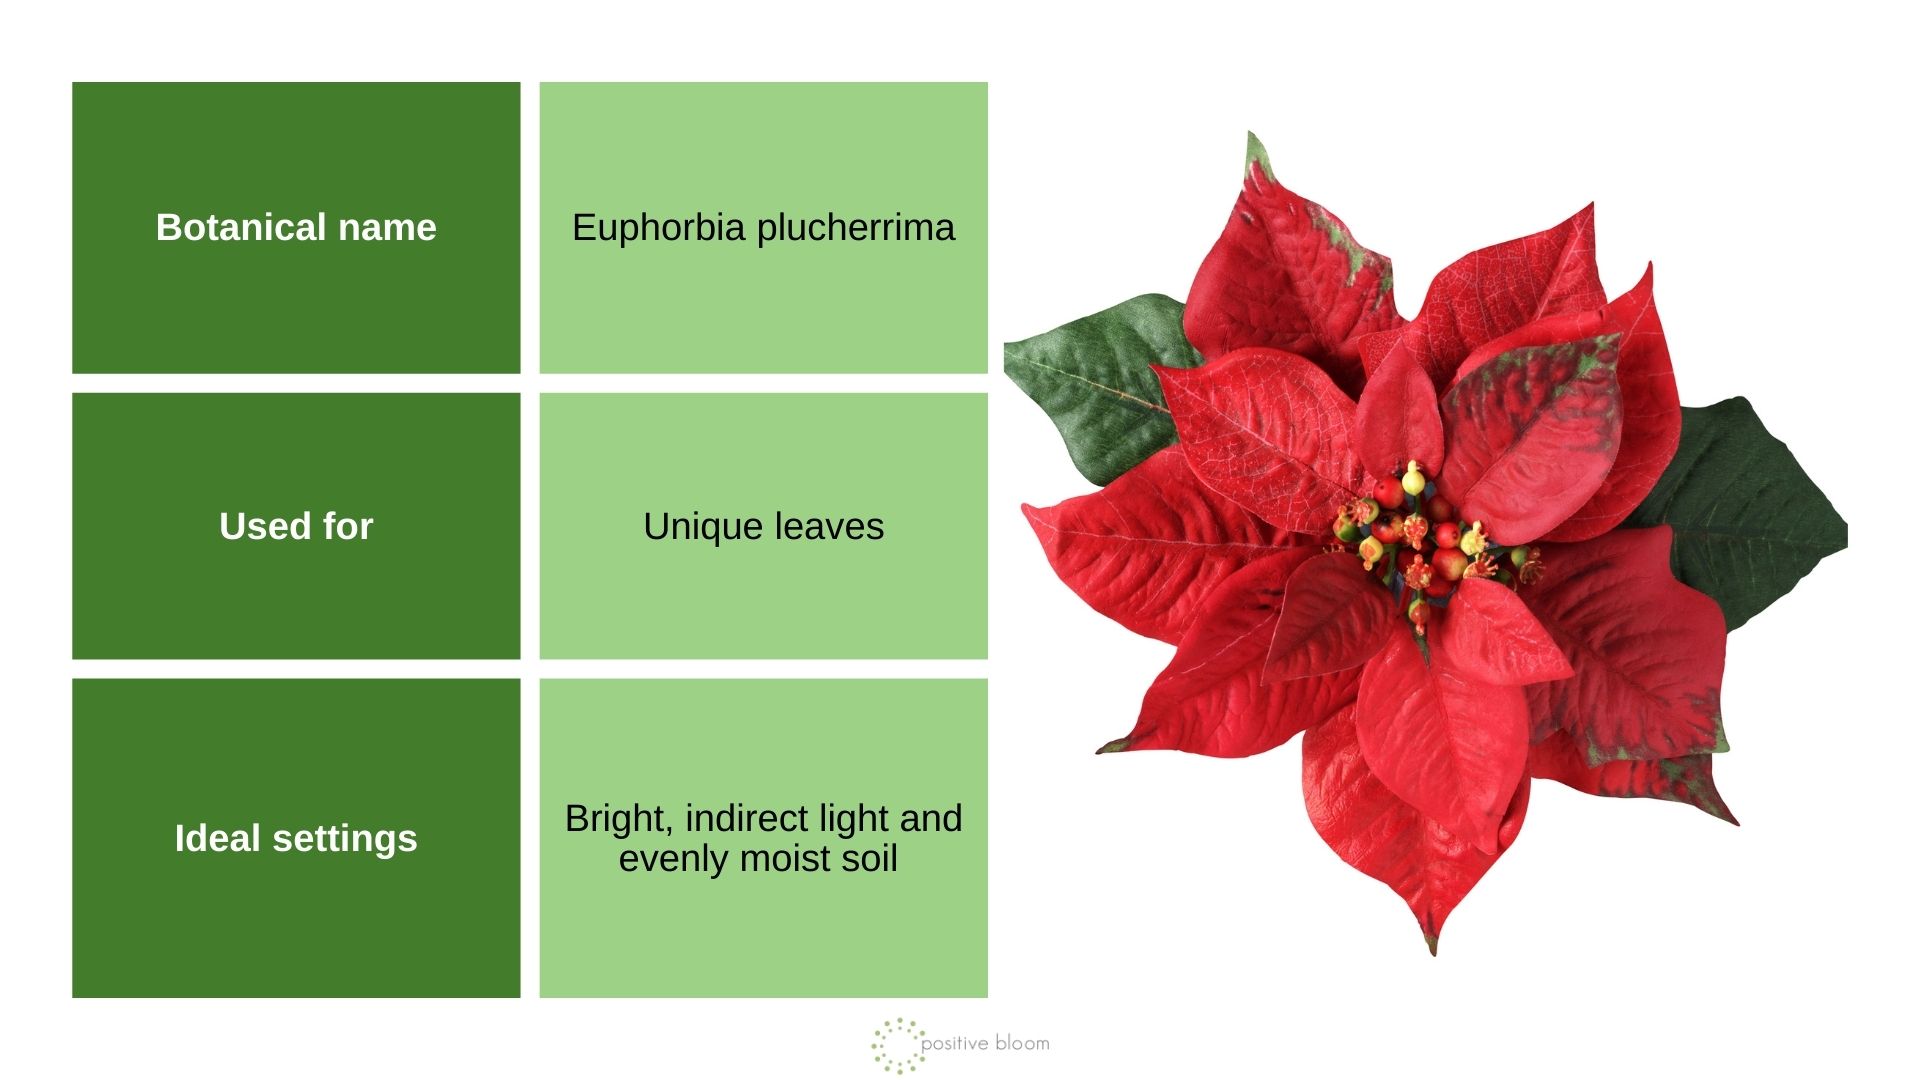 Poinsettia info chart and photo